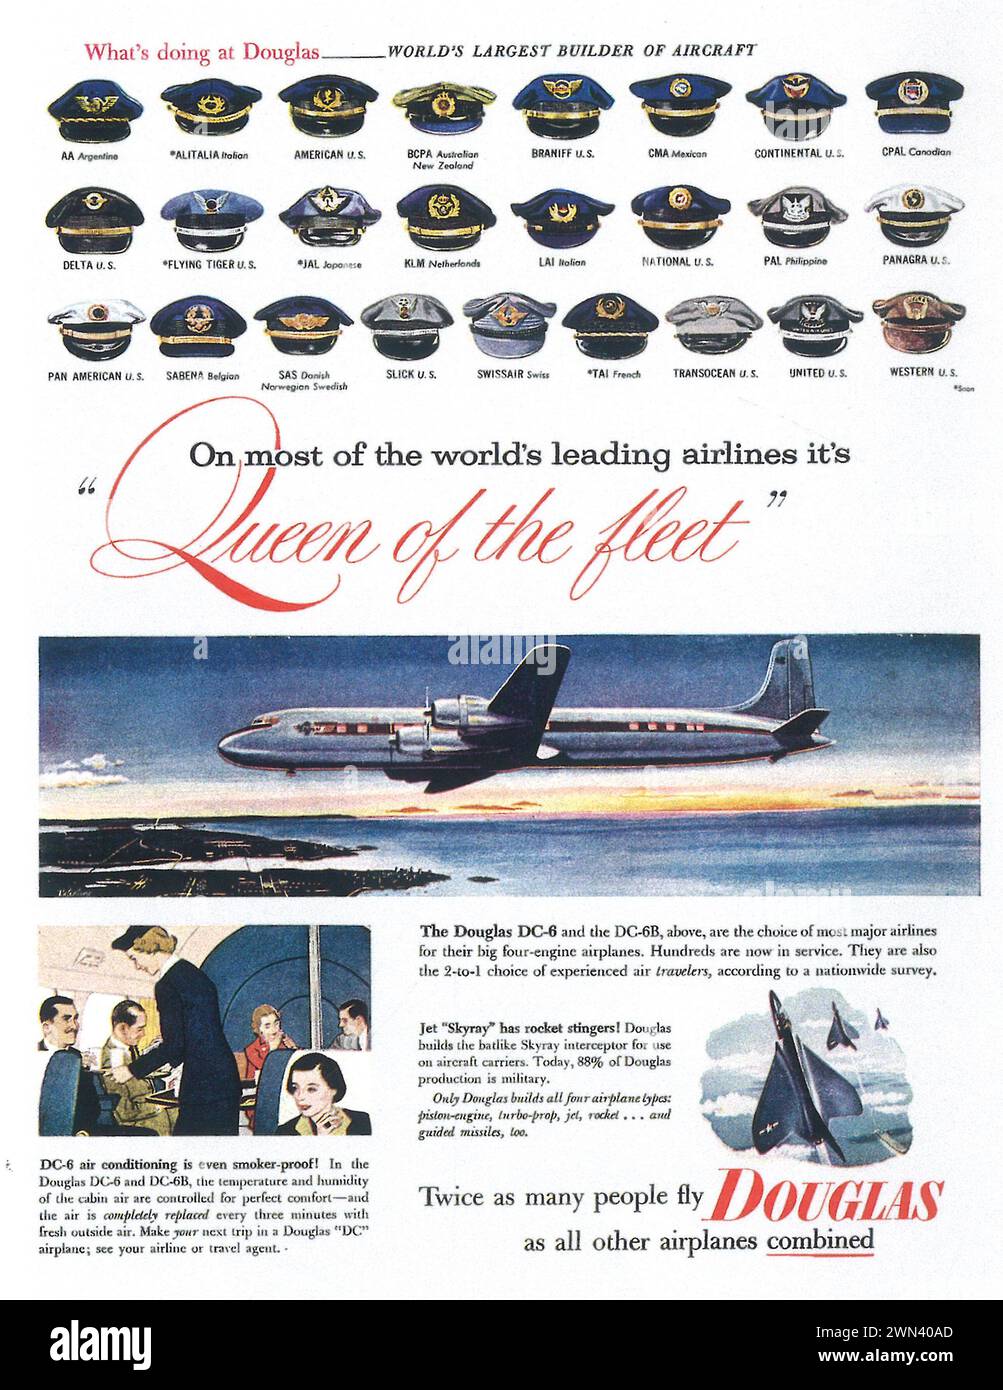 1953 Douglas DC6, Douglas DC6-B aircraft print ad. 'On most of the world's leading airlines it's Queen of the fleet.' Stock Photo